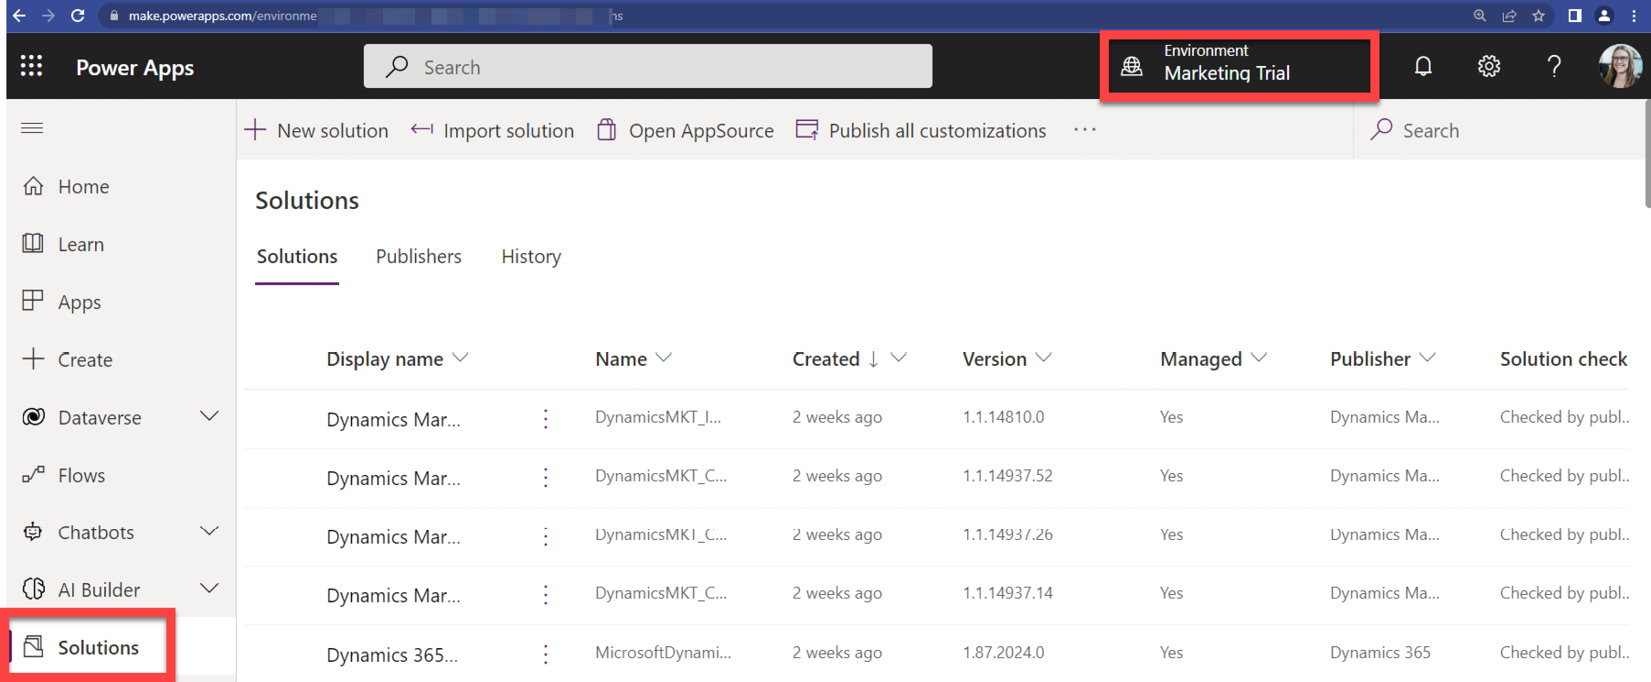 Figure 10.3 – Solutions in make.powerapps.com
